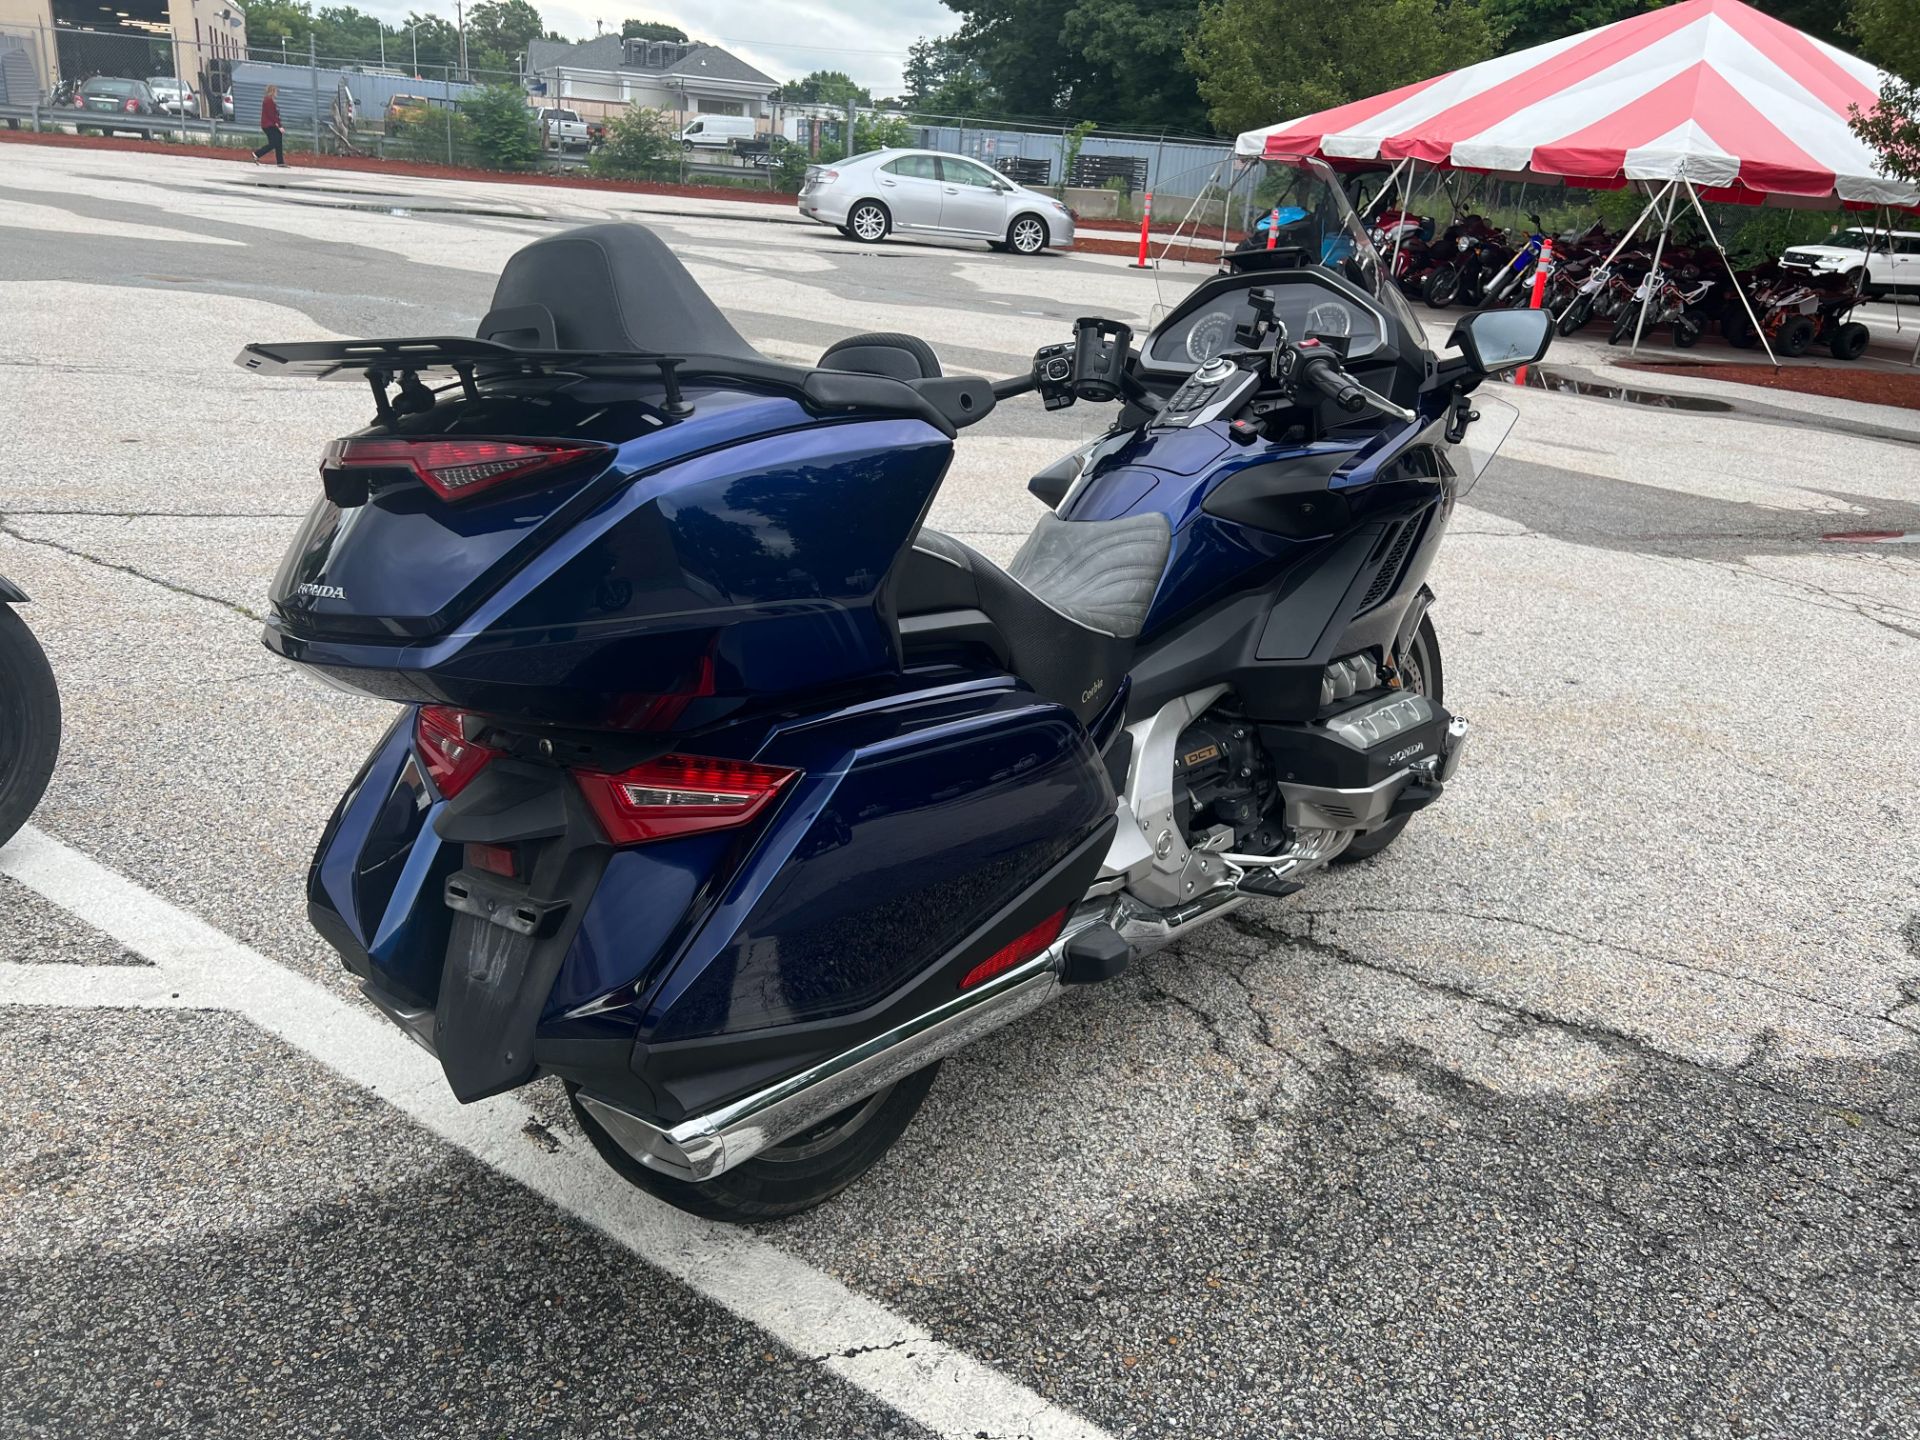 Used 2018 Honda GOLD WING TOUR DCT BLUE Motorcycles For Sale in ...